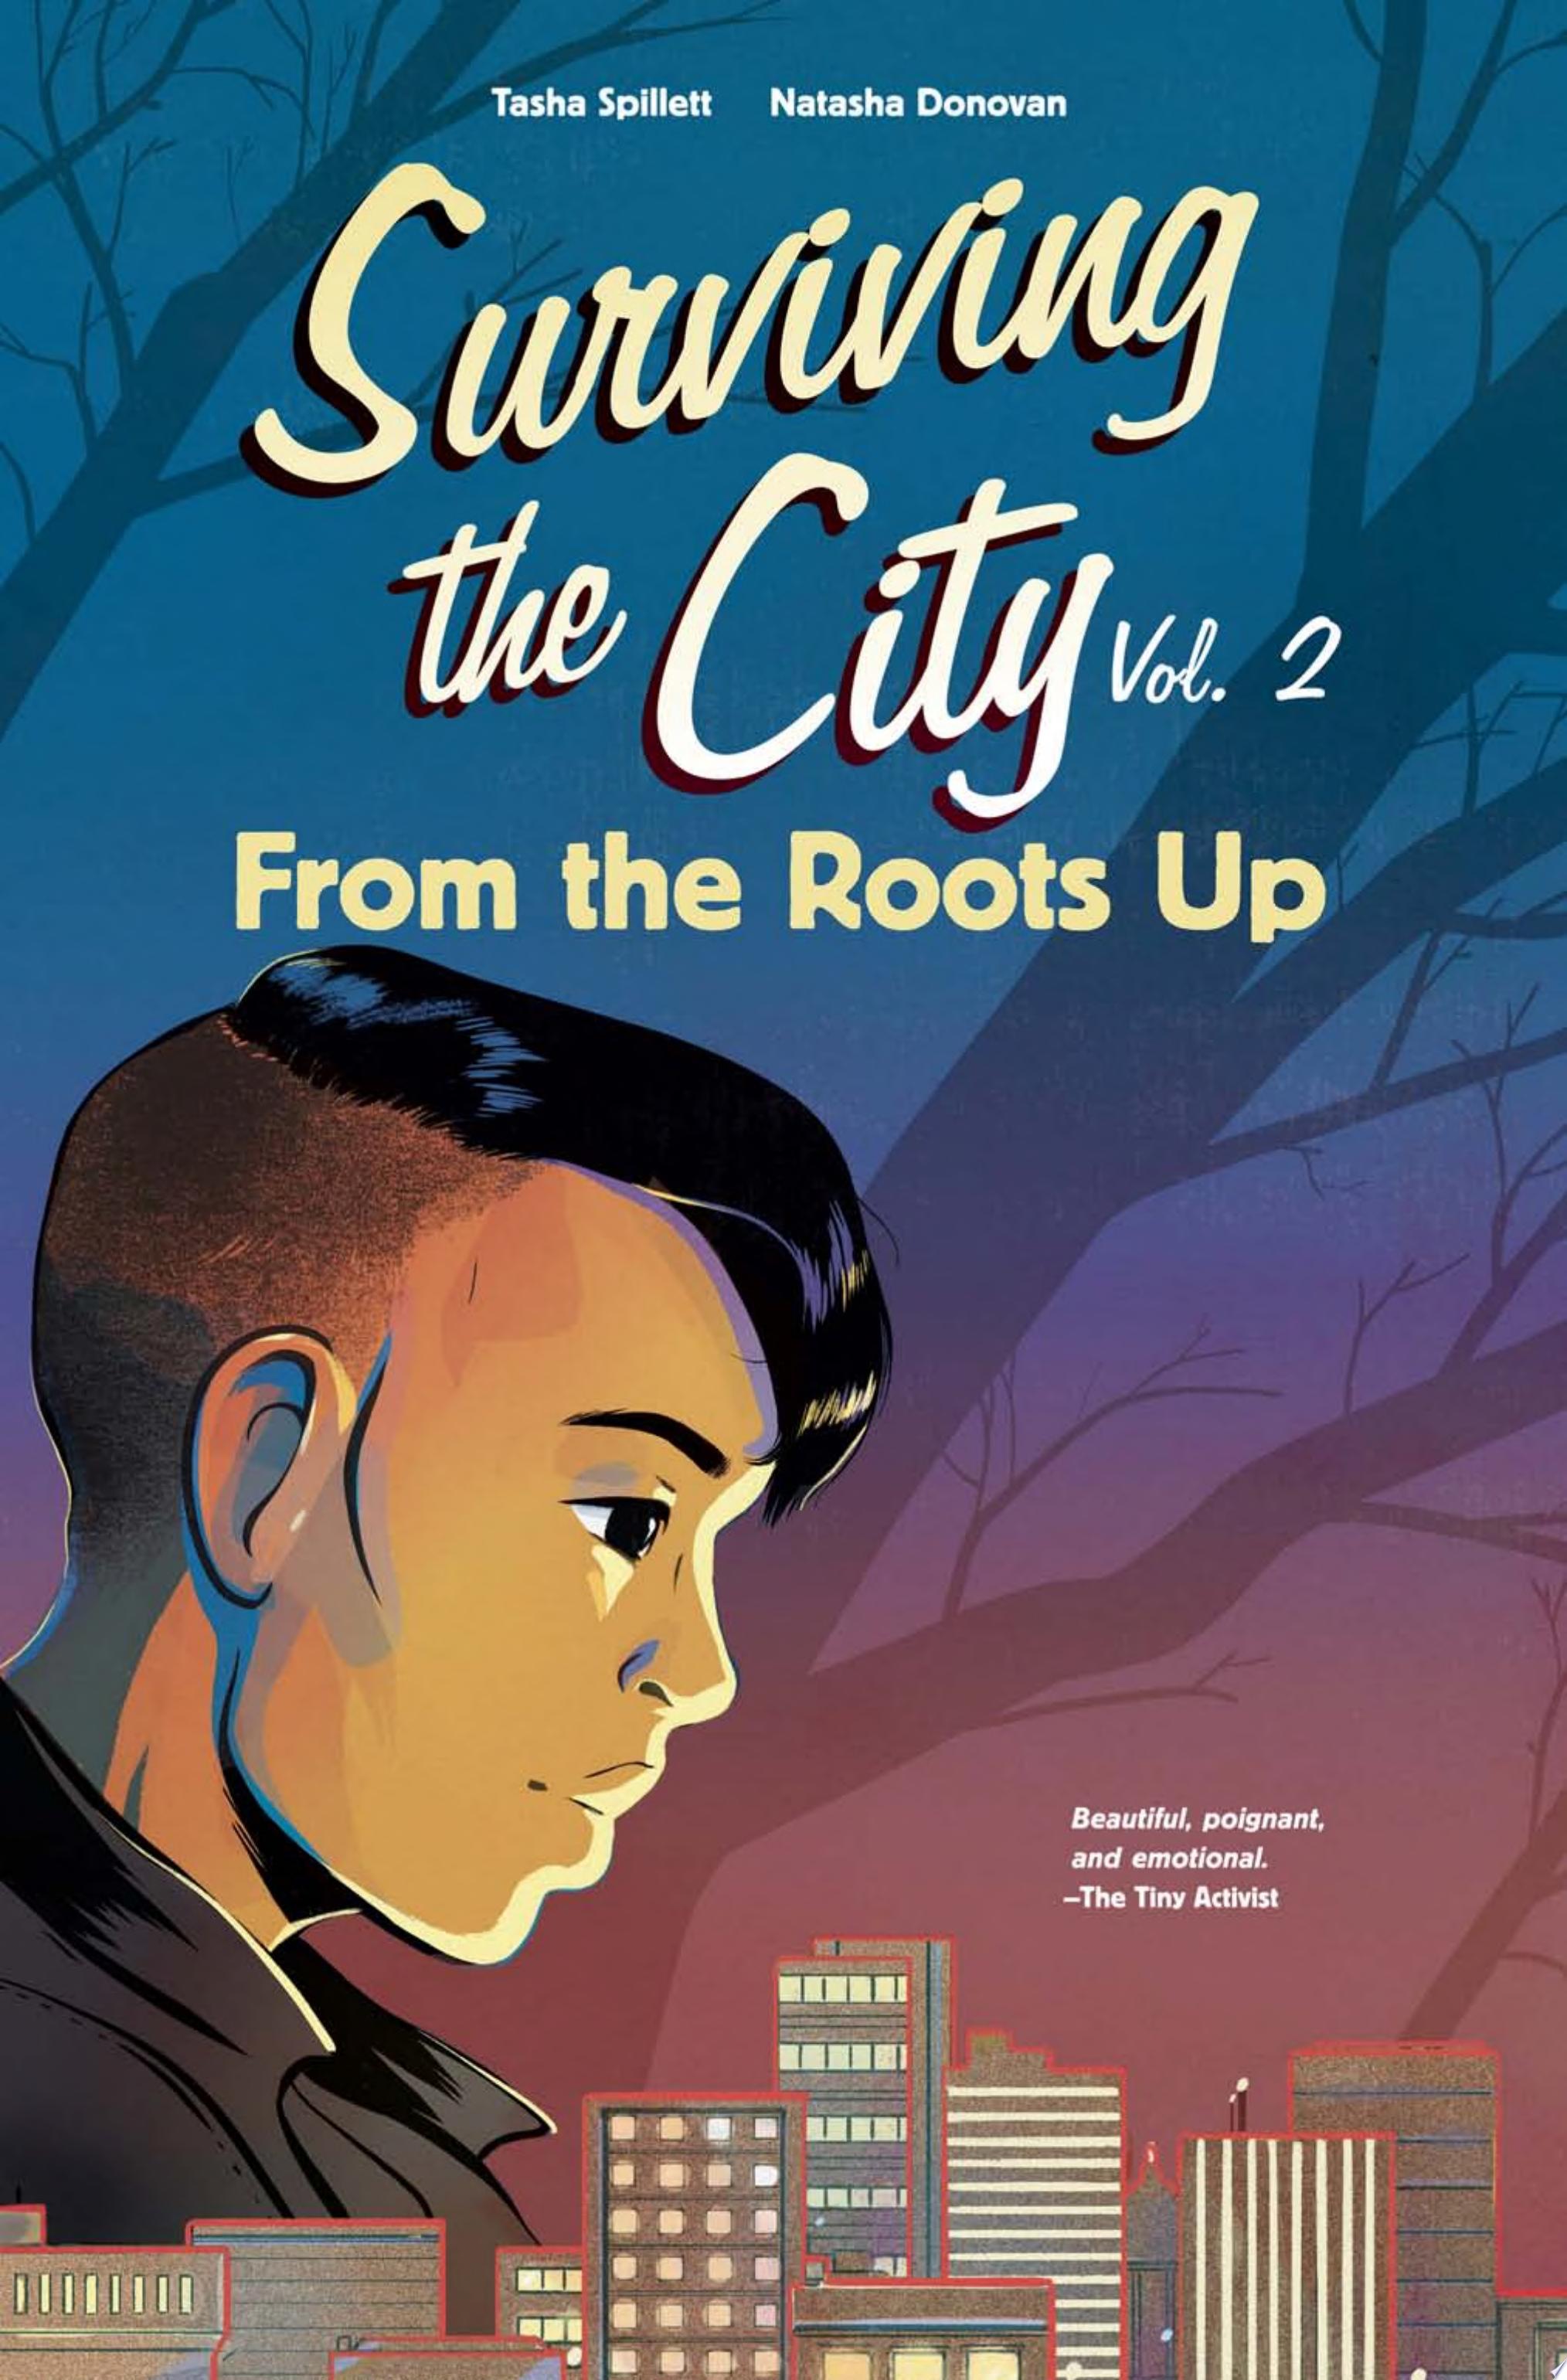 Image for "From the Roots Up"